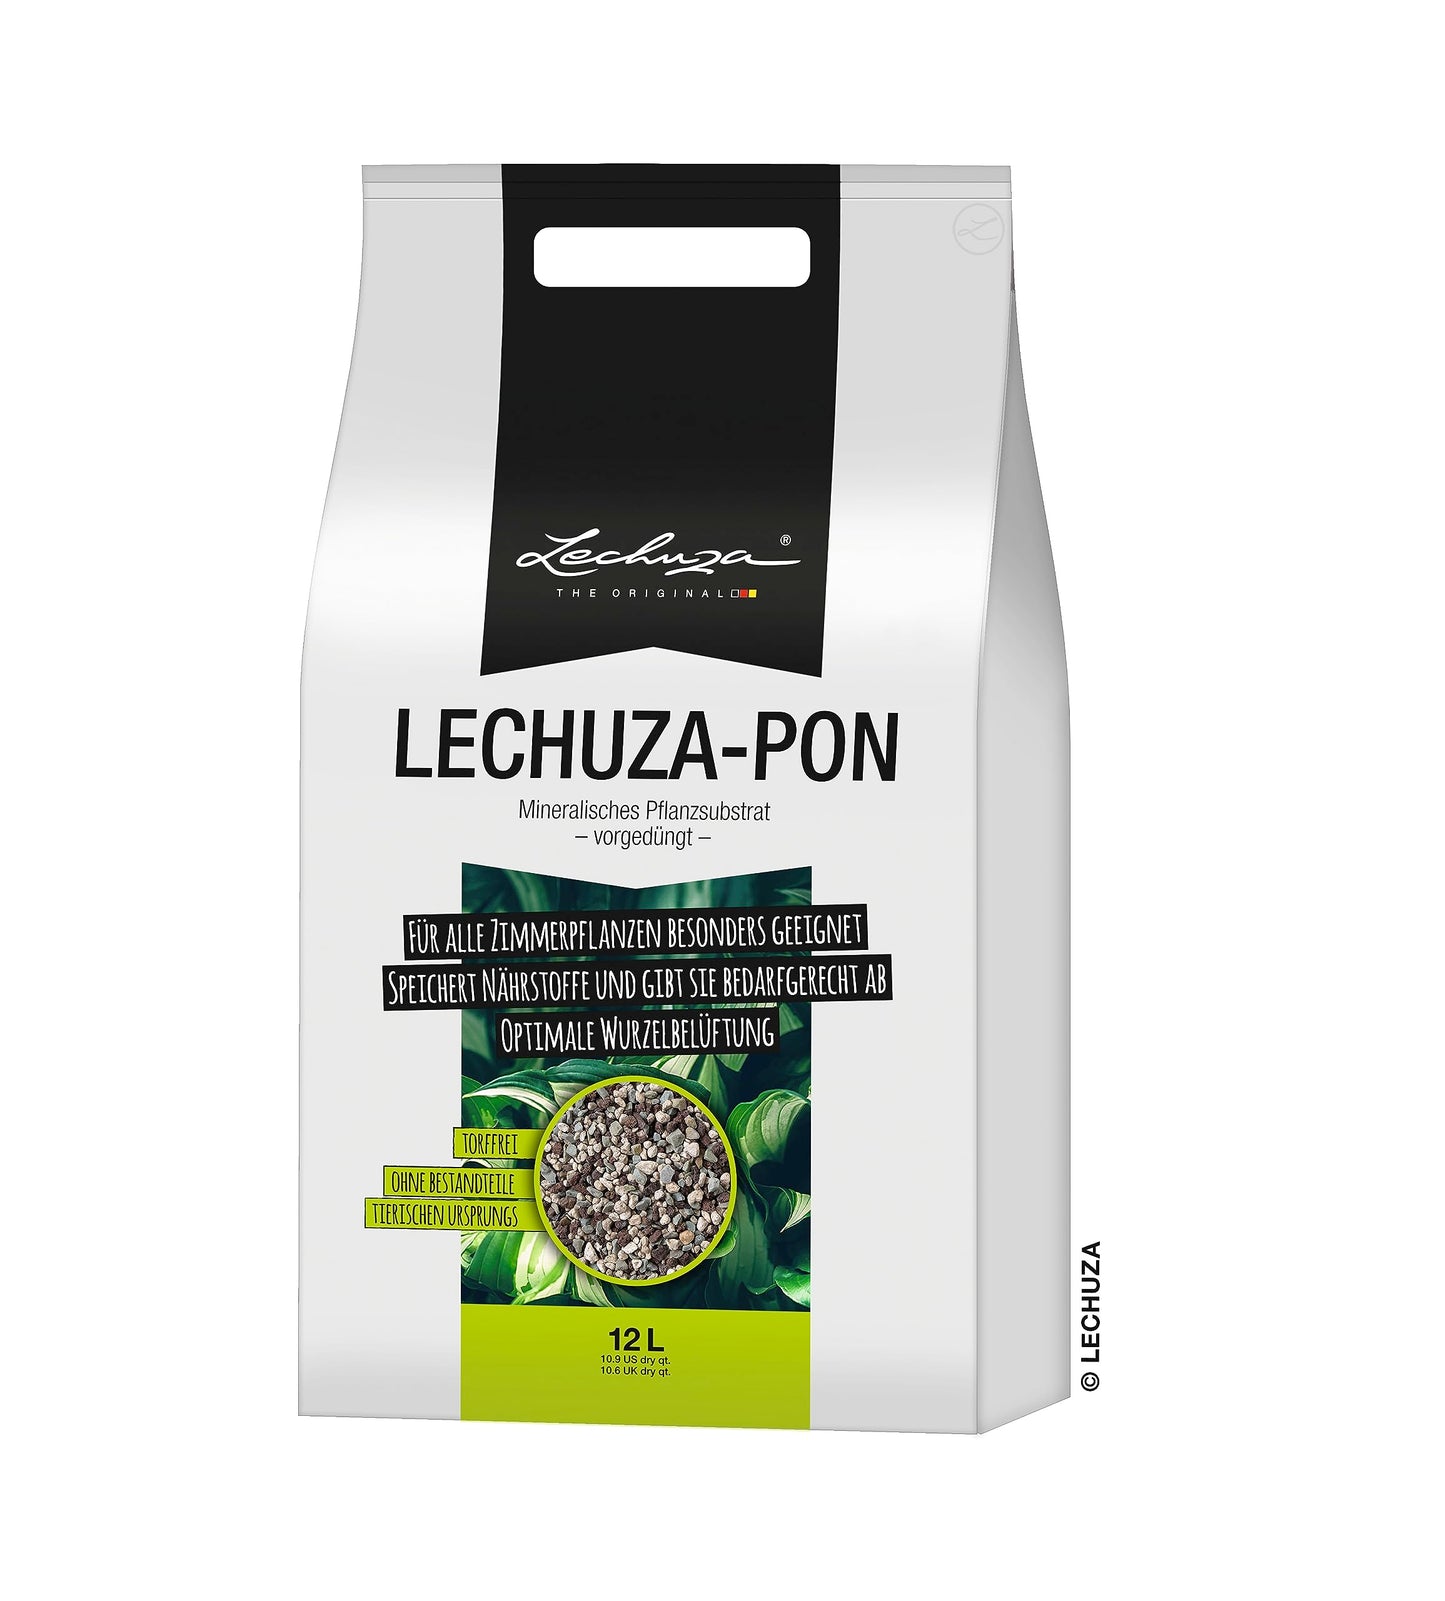 Lechuza PON Mineral Plant Substrate